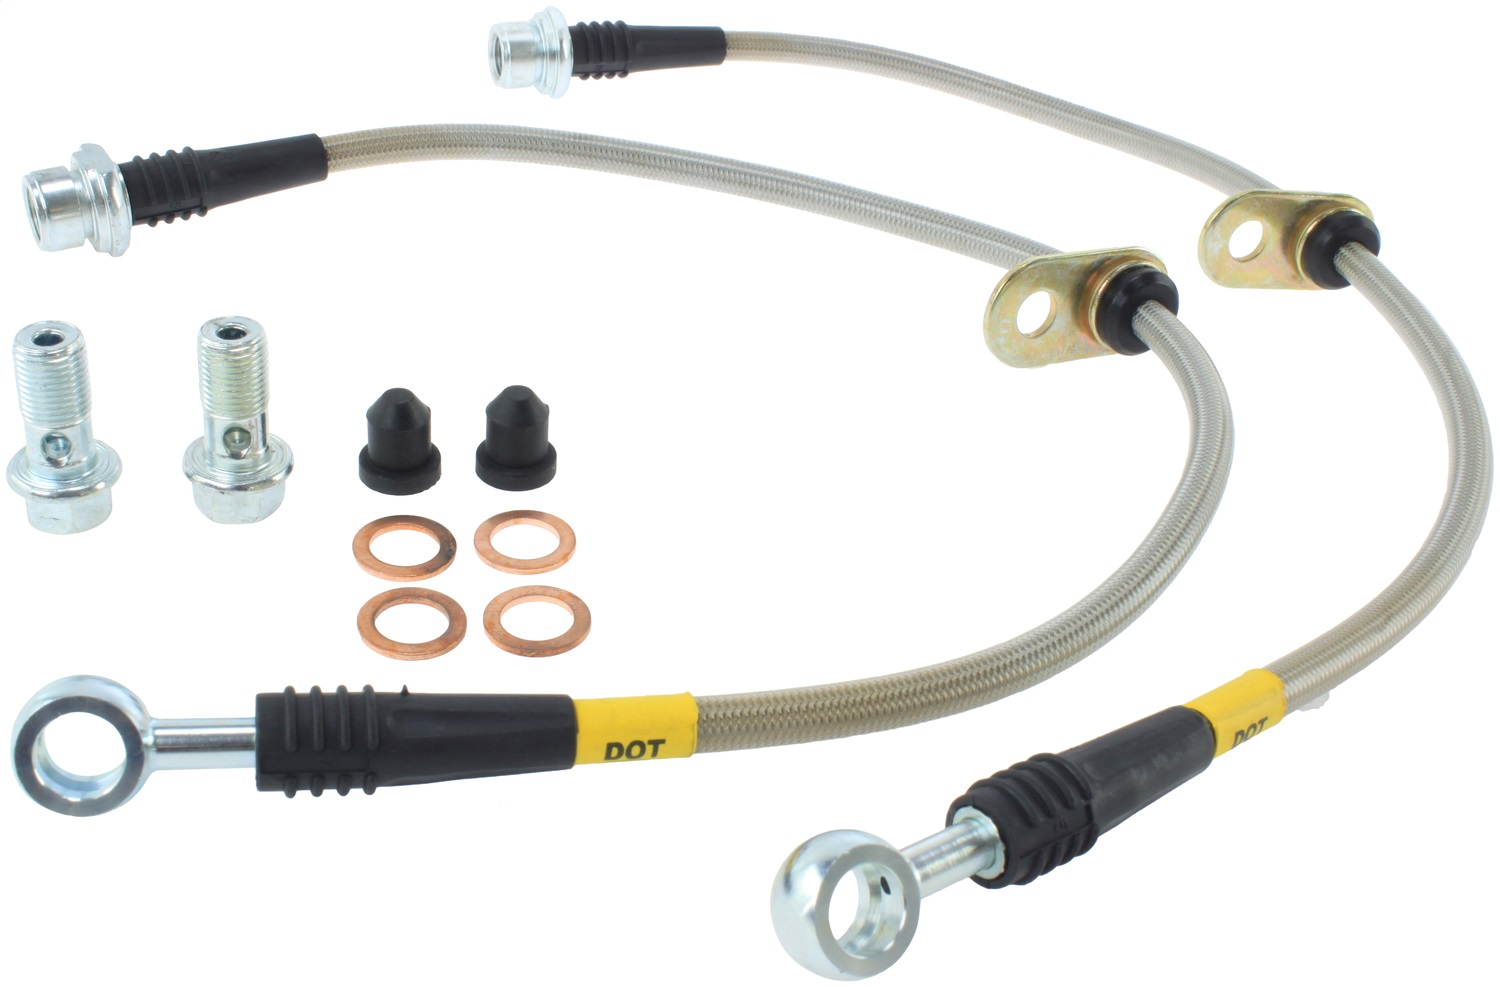 StopTech 950.44025 Stainless Steel Hose Set Fits 08-20 Land Cruiser LX570